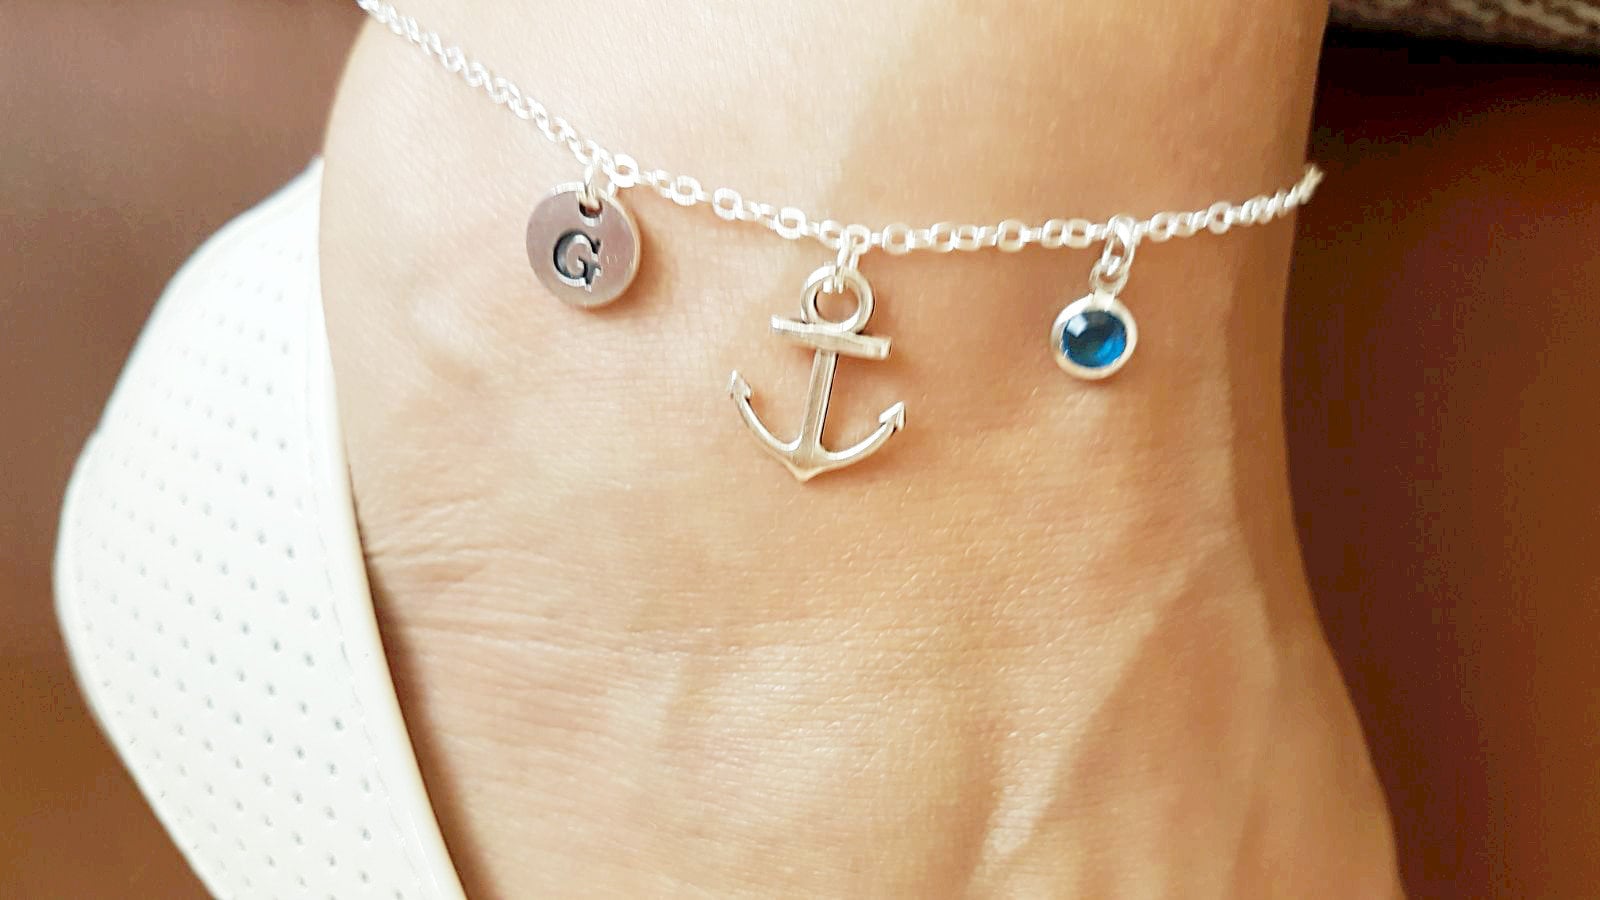 Anchor anklet, Anchor Anklet for her, Anchor Charm Anklet, Personalized anchor gift,Anchor Charm, Silver Anchor anklet,Summer, Beach,initial